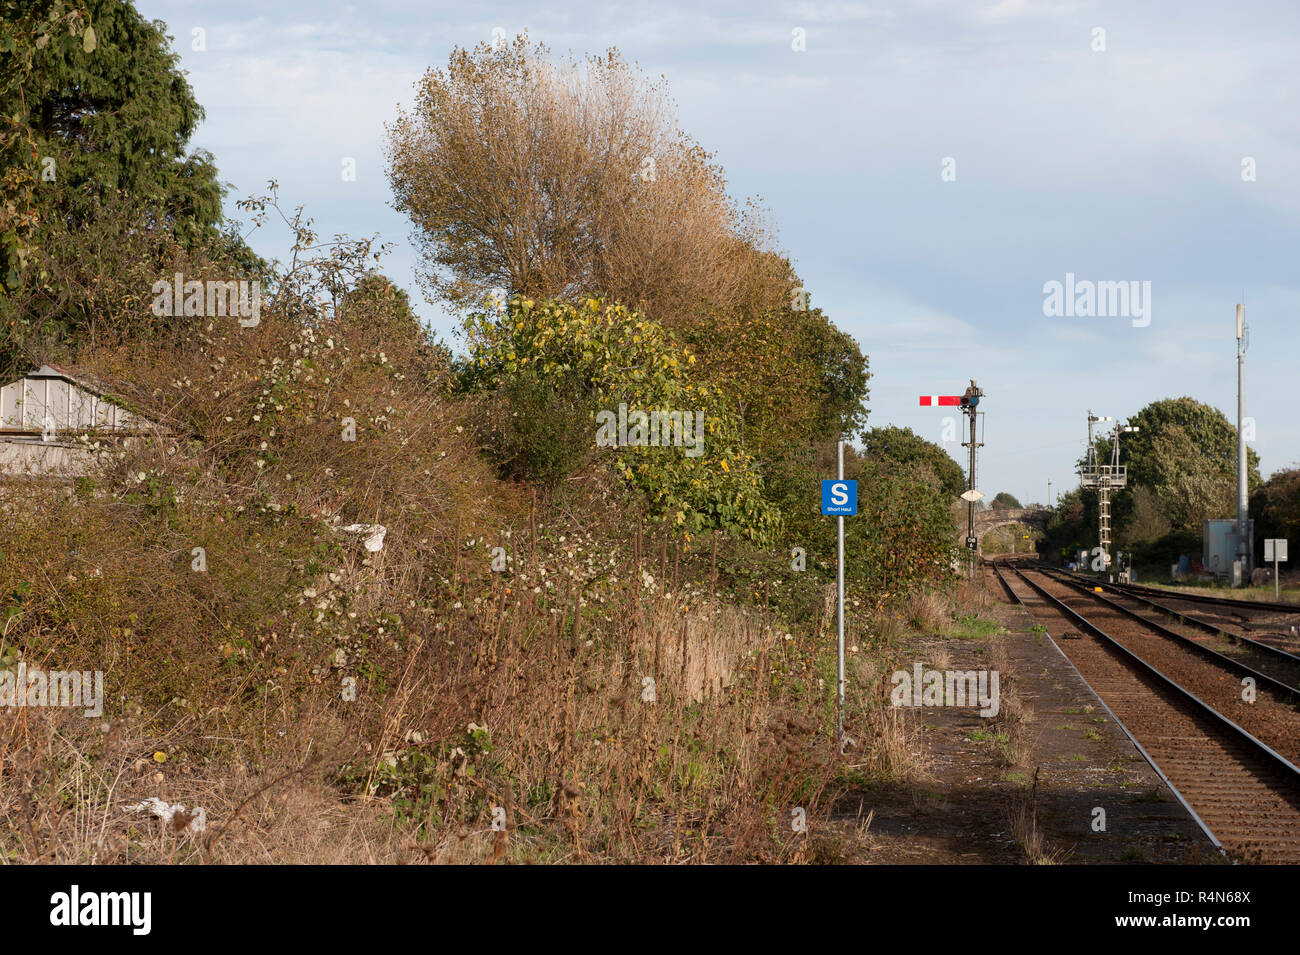 Oulton Broad North Railway Station, Suffolk, Looking east showing an unused and weed bound platform. Stock Photo